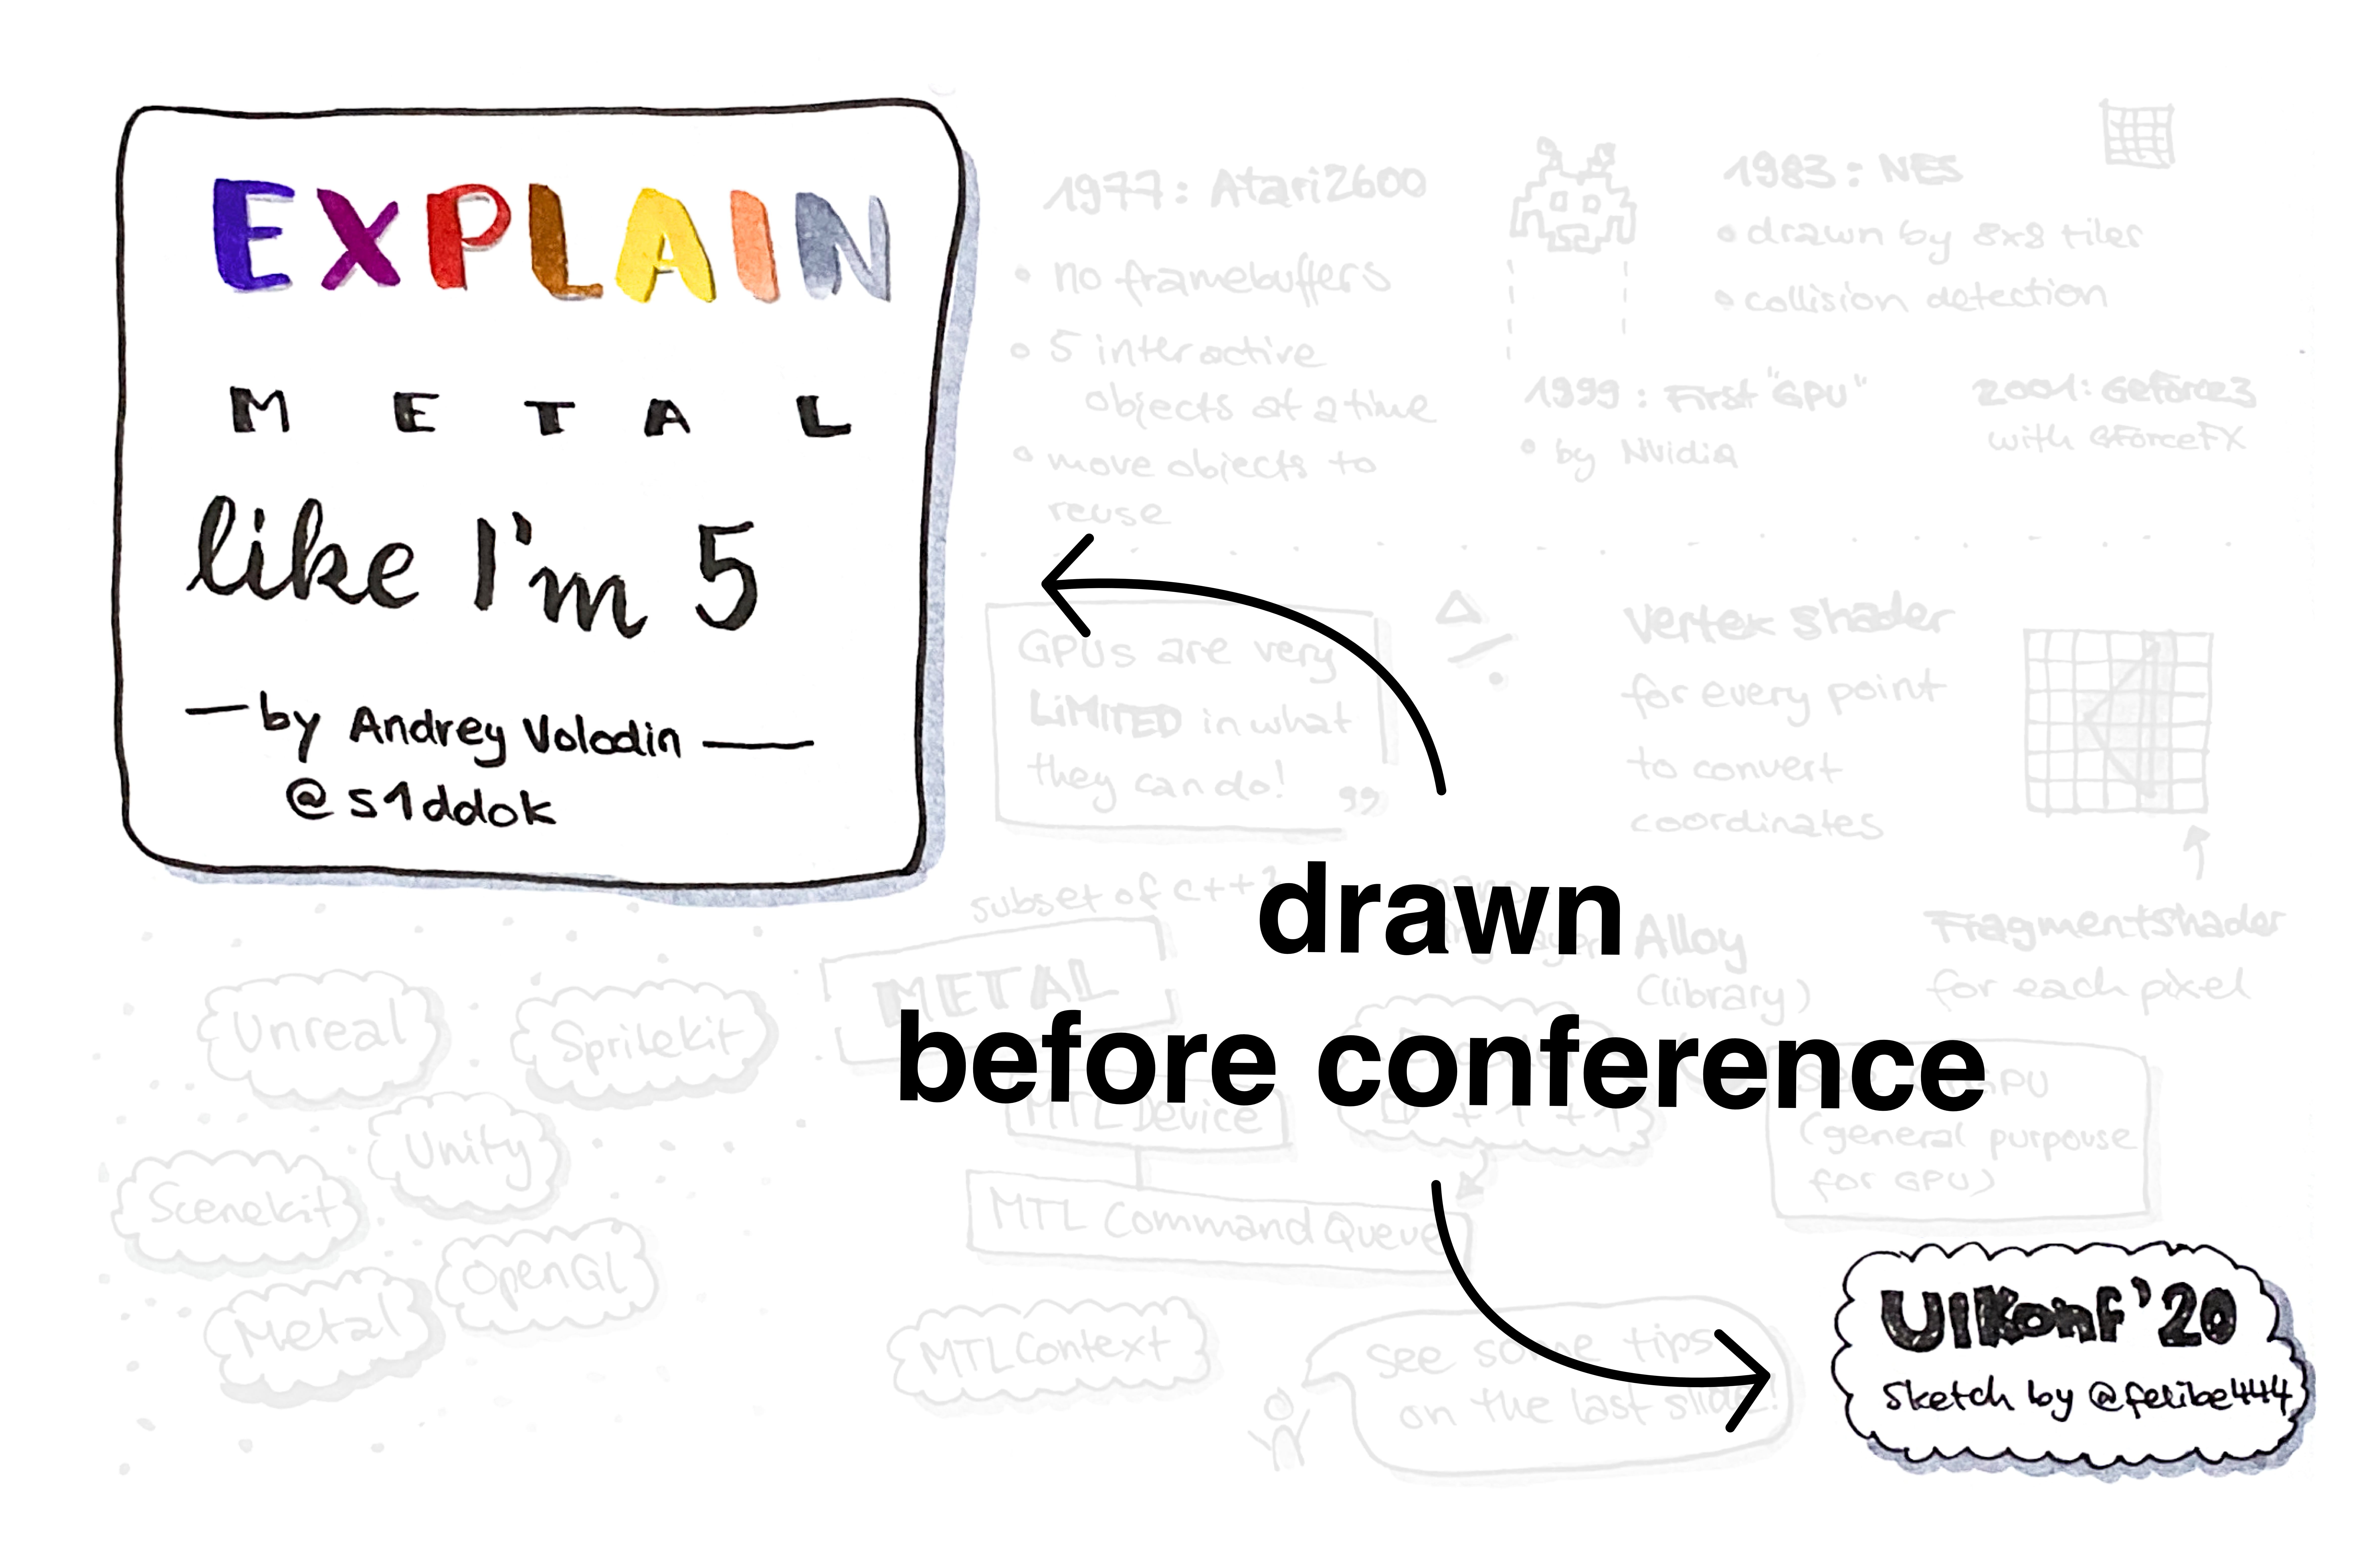 Sketchnote header, conference and credits signature are highlighted on the sketchnote.